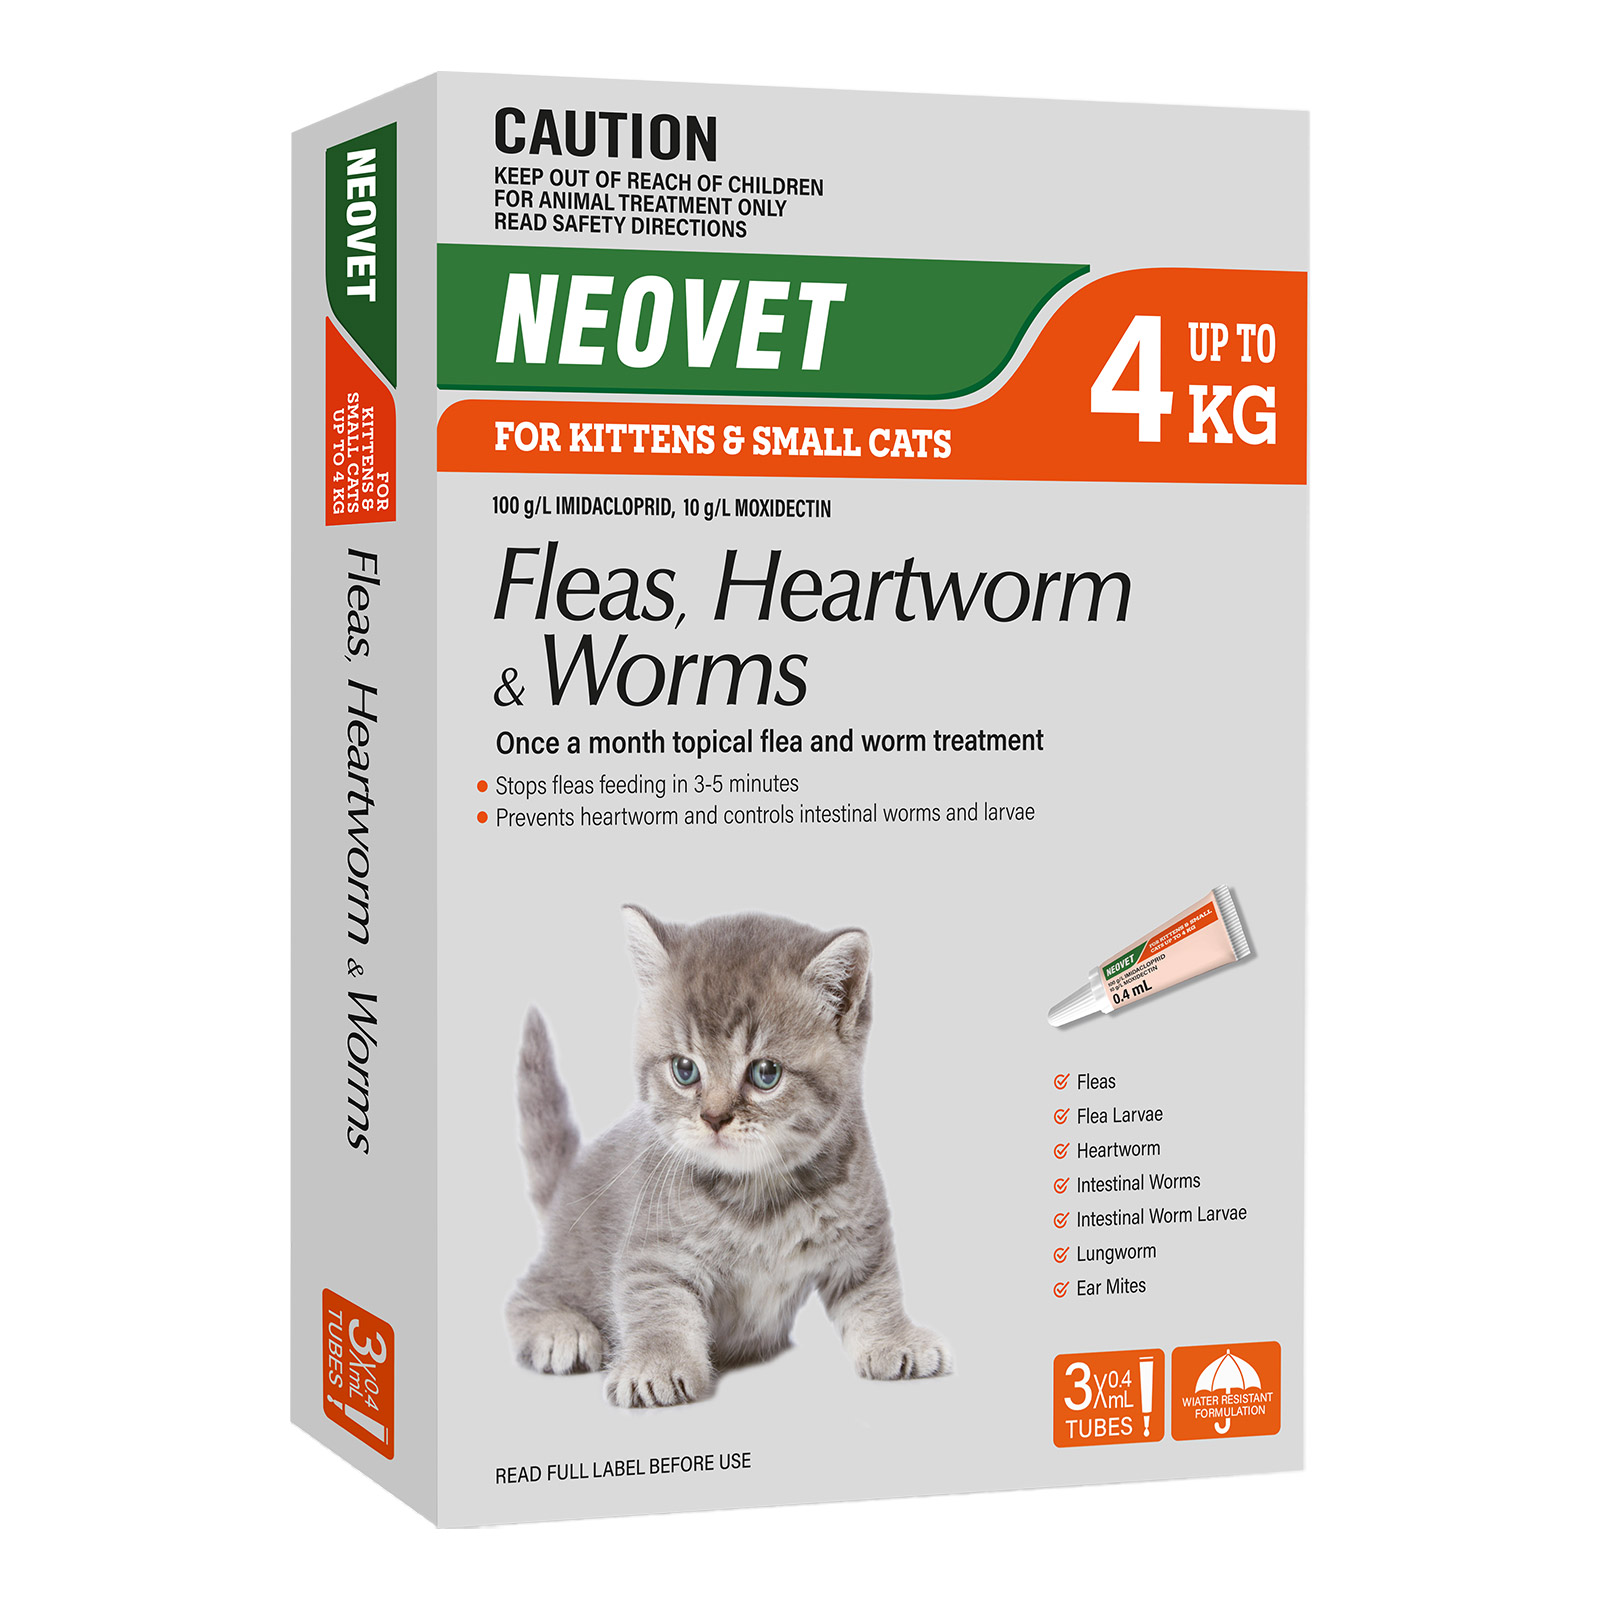 Buy Neovet Flea and Worming for Cats Online at DiscountPetCare.com.au